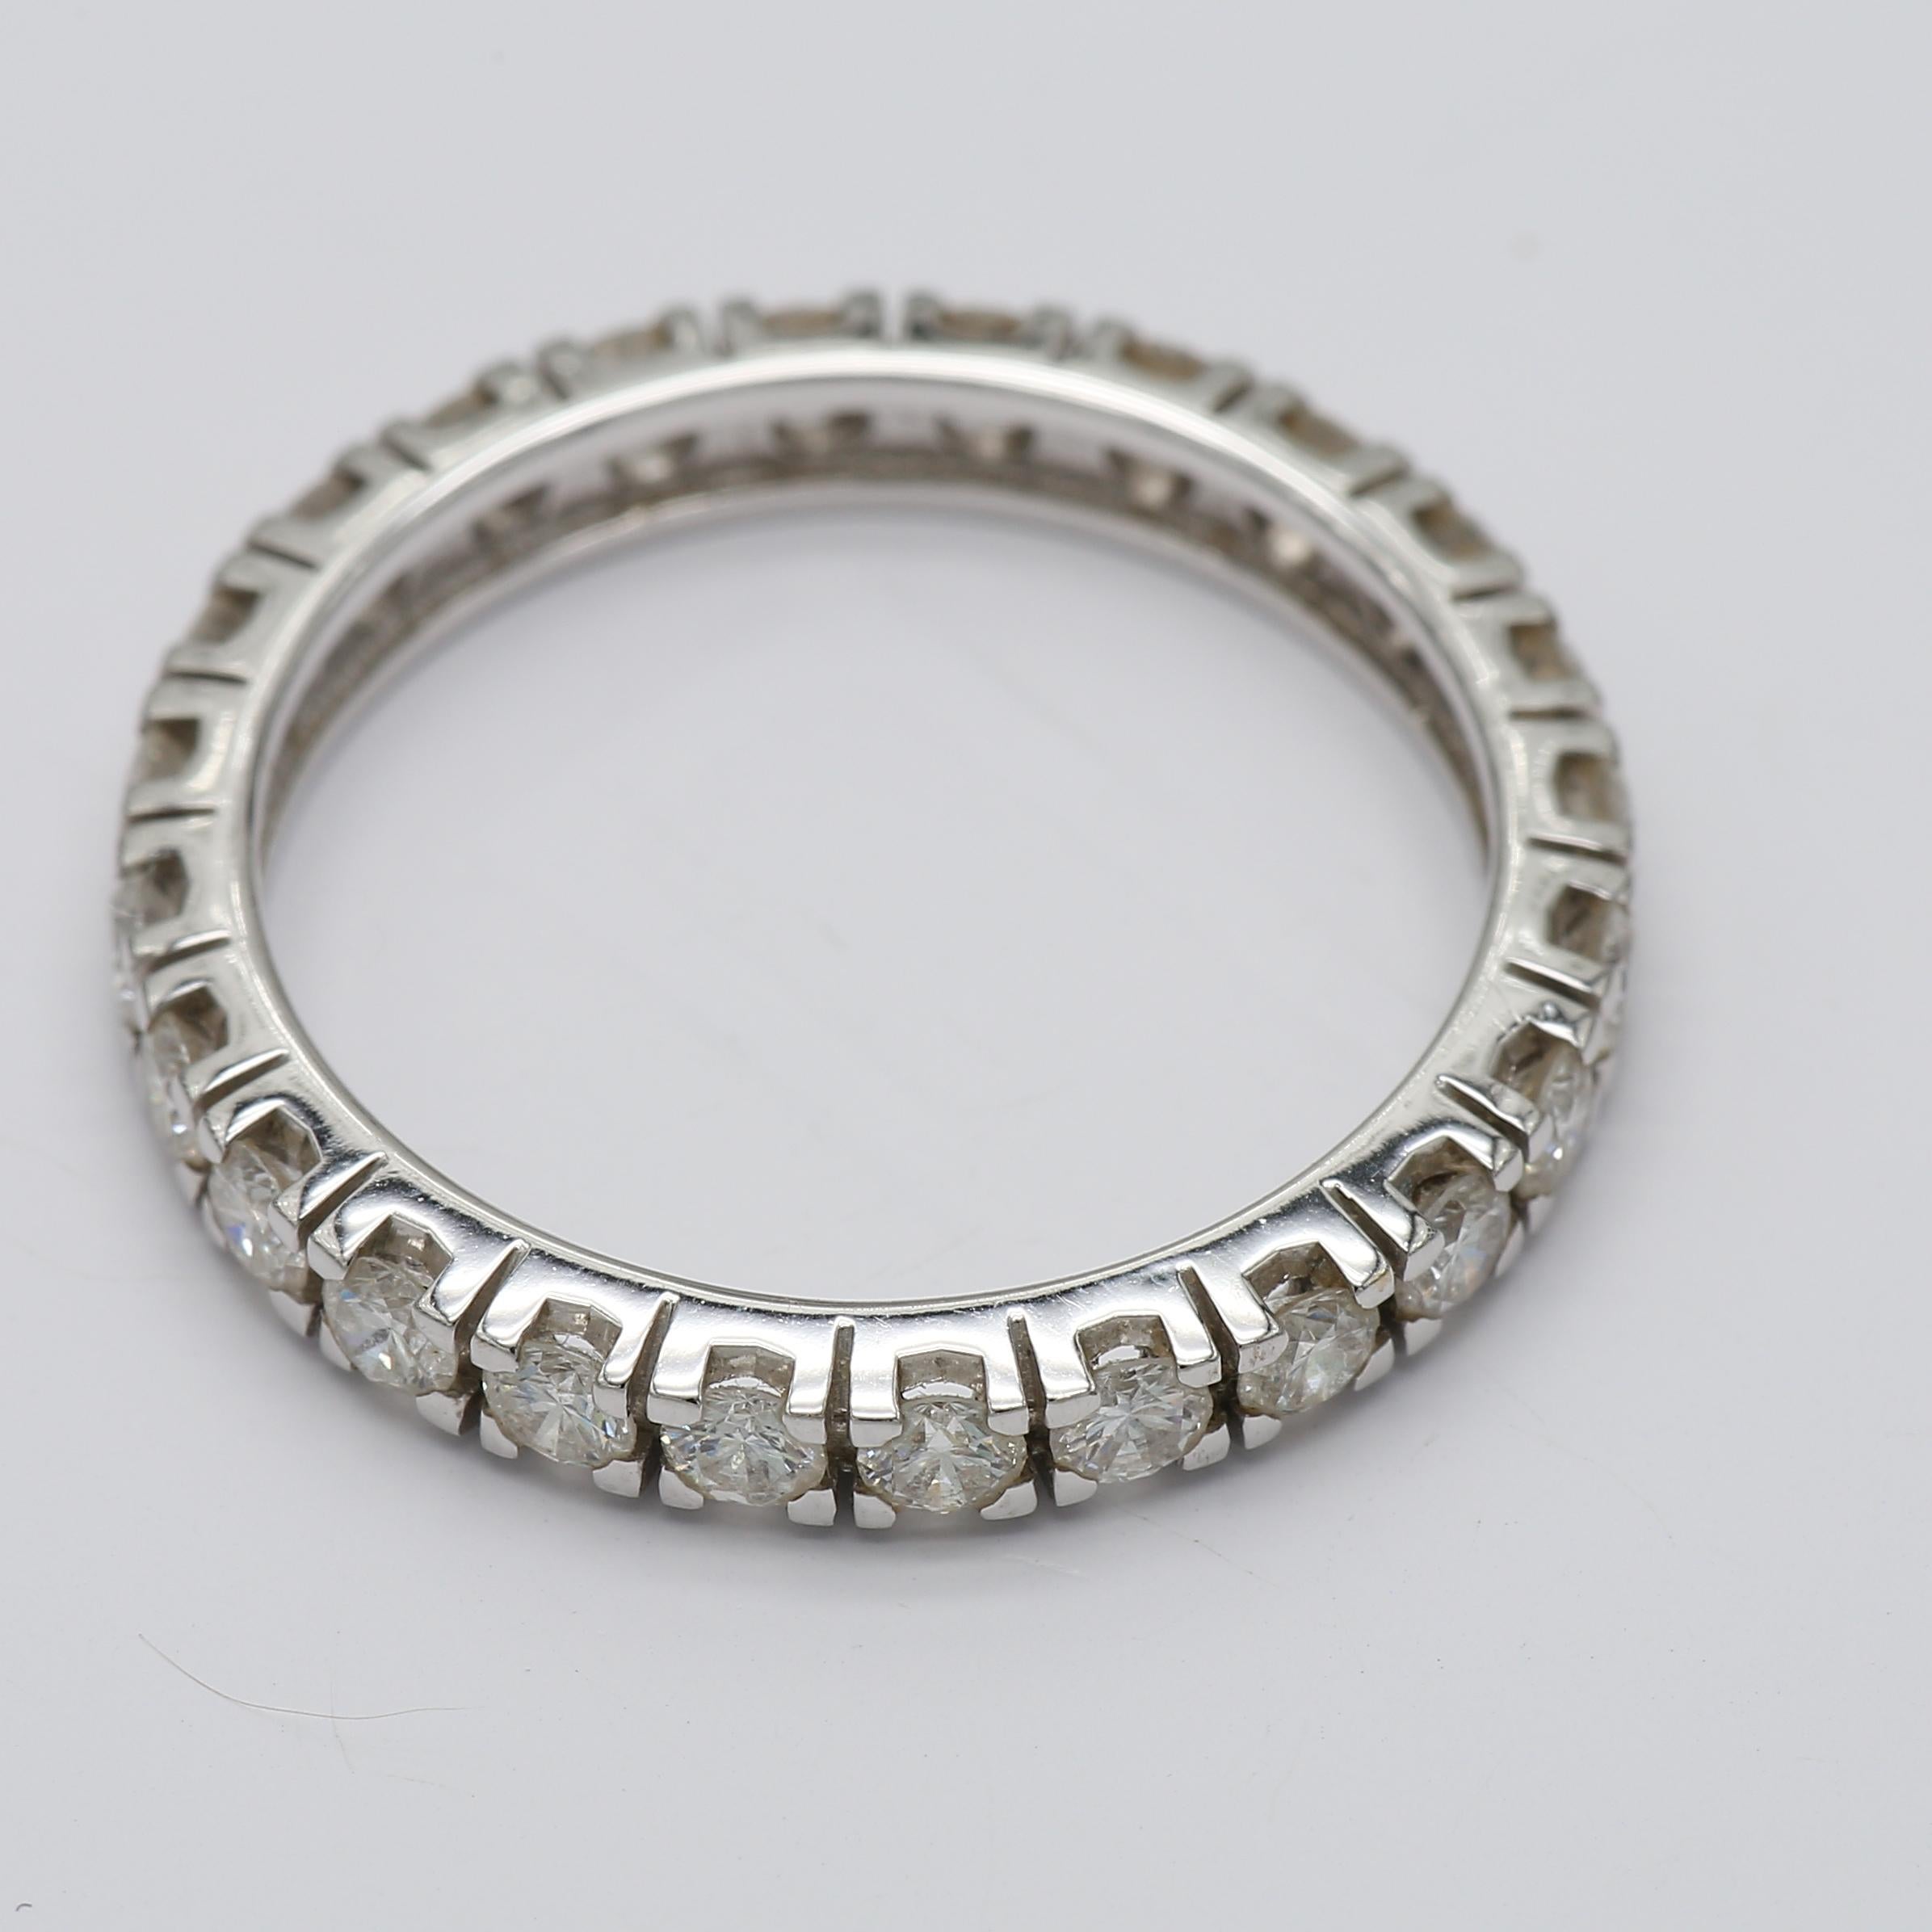 Delicate Eternity Band set with 24 Round Diamonds (Total Carat Weight 1.90 ) in White Gold. Upgrade your jewelry collection with this classic ring or gift it to your loved. Anyway this classic diamond eternity ring will bring you sparkles and joy